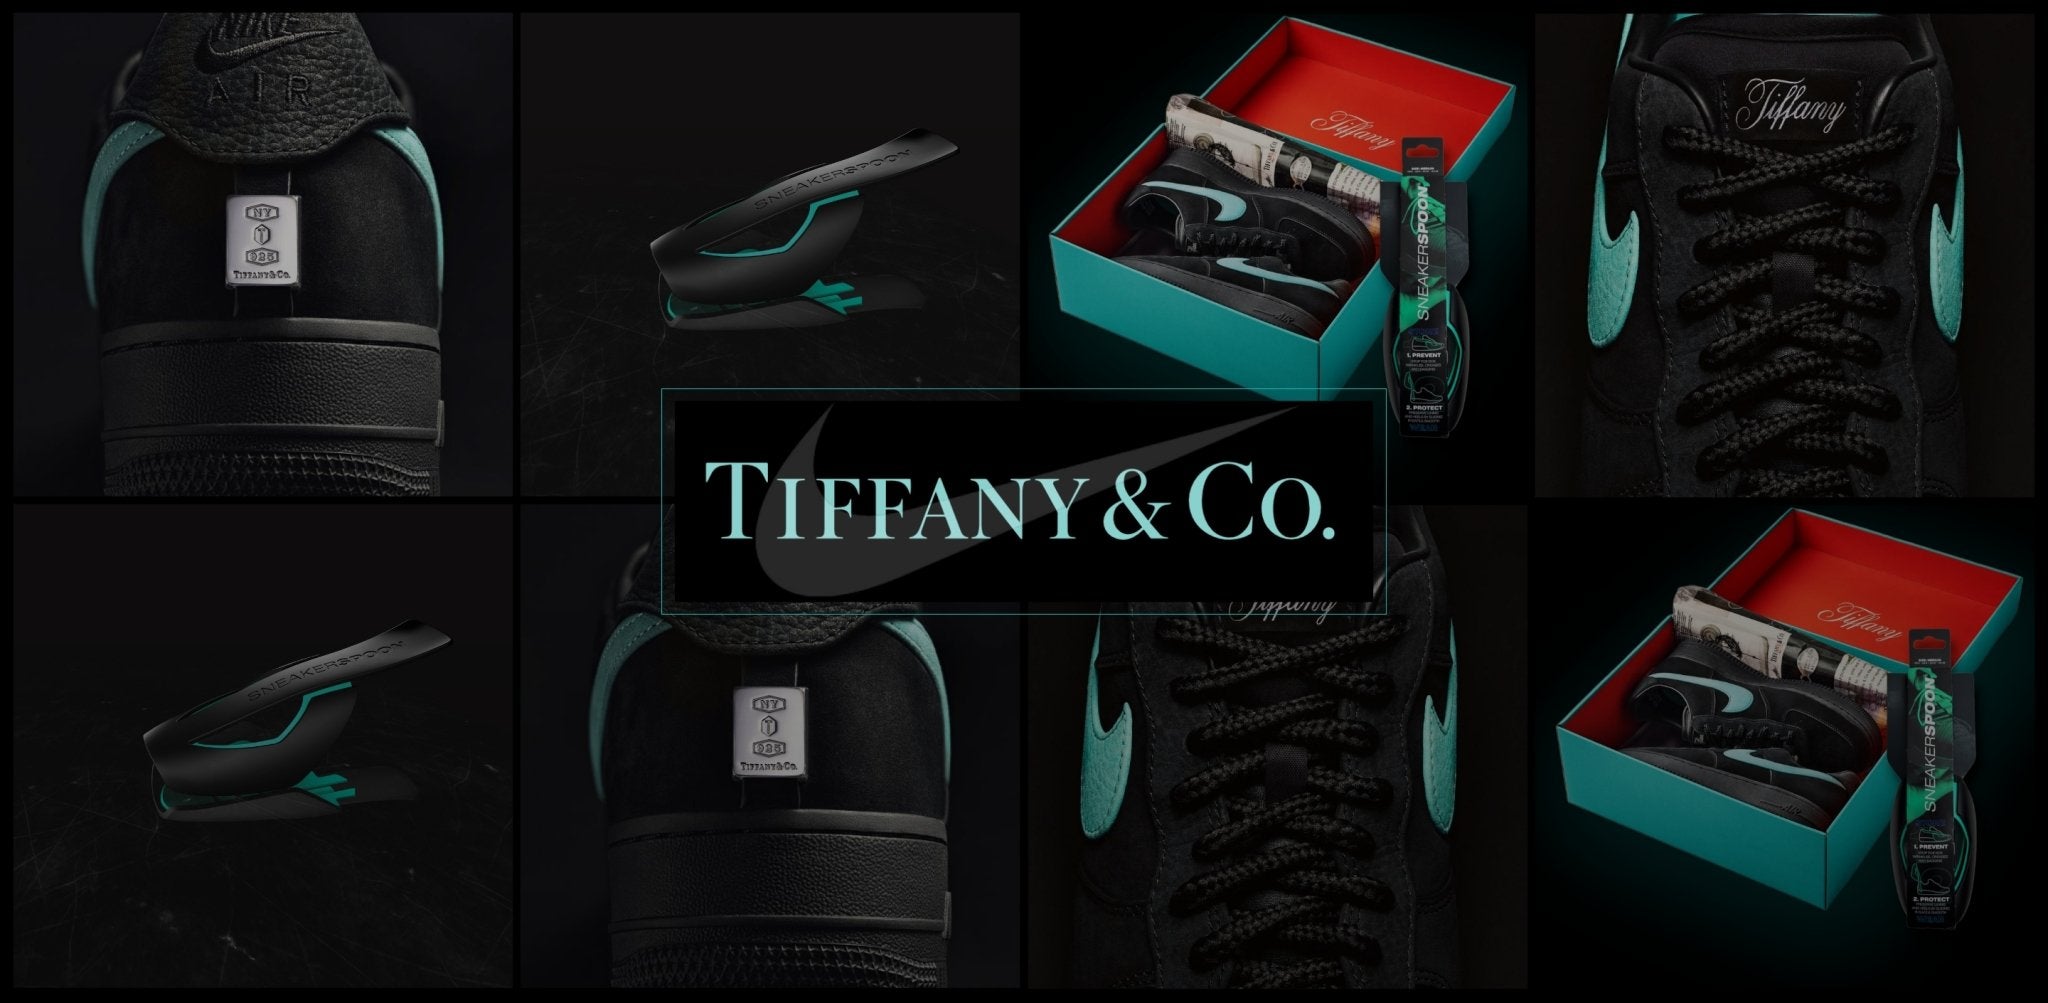 Nike and Tiffany & Co. Team Up for an Epic Sneaker Collaboration - Sneakerspoon®